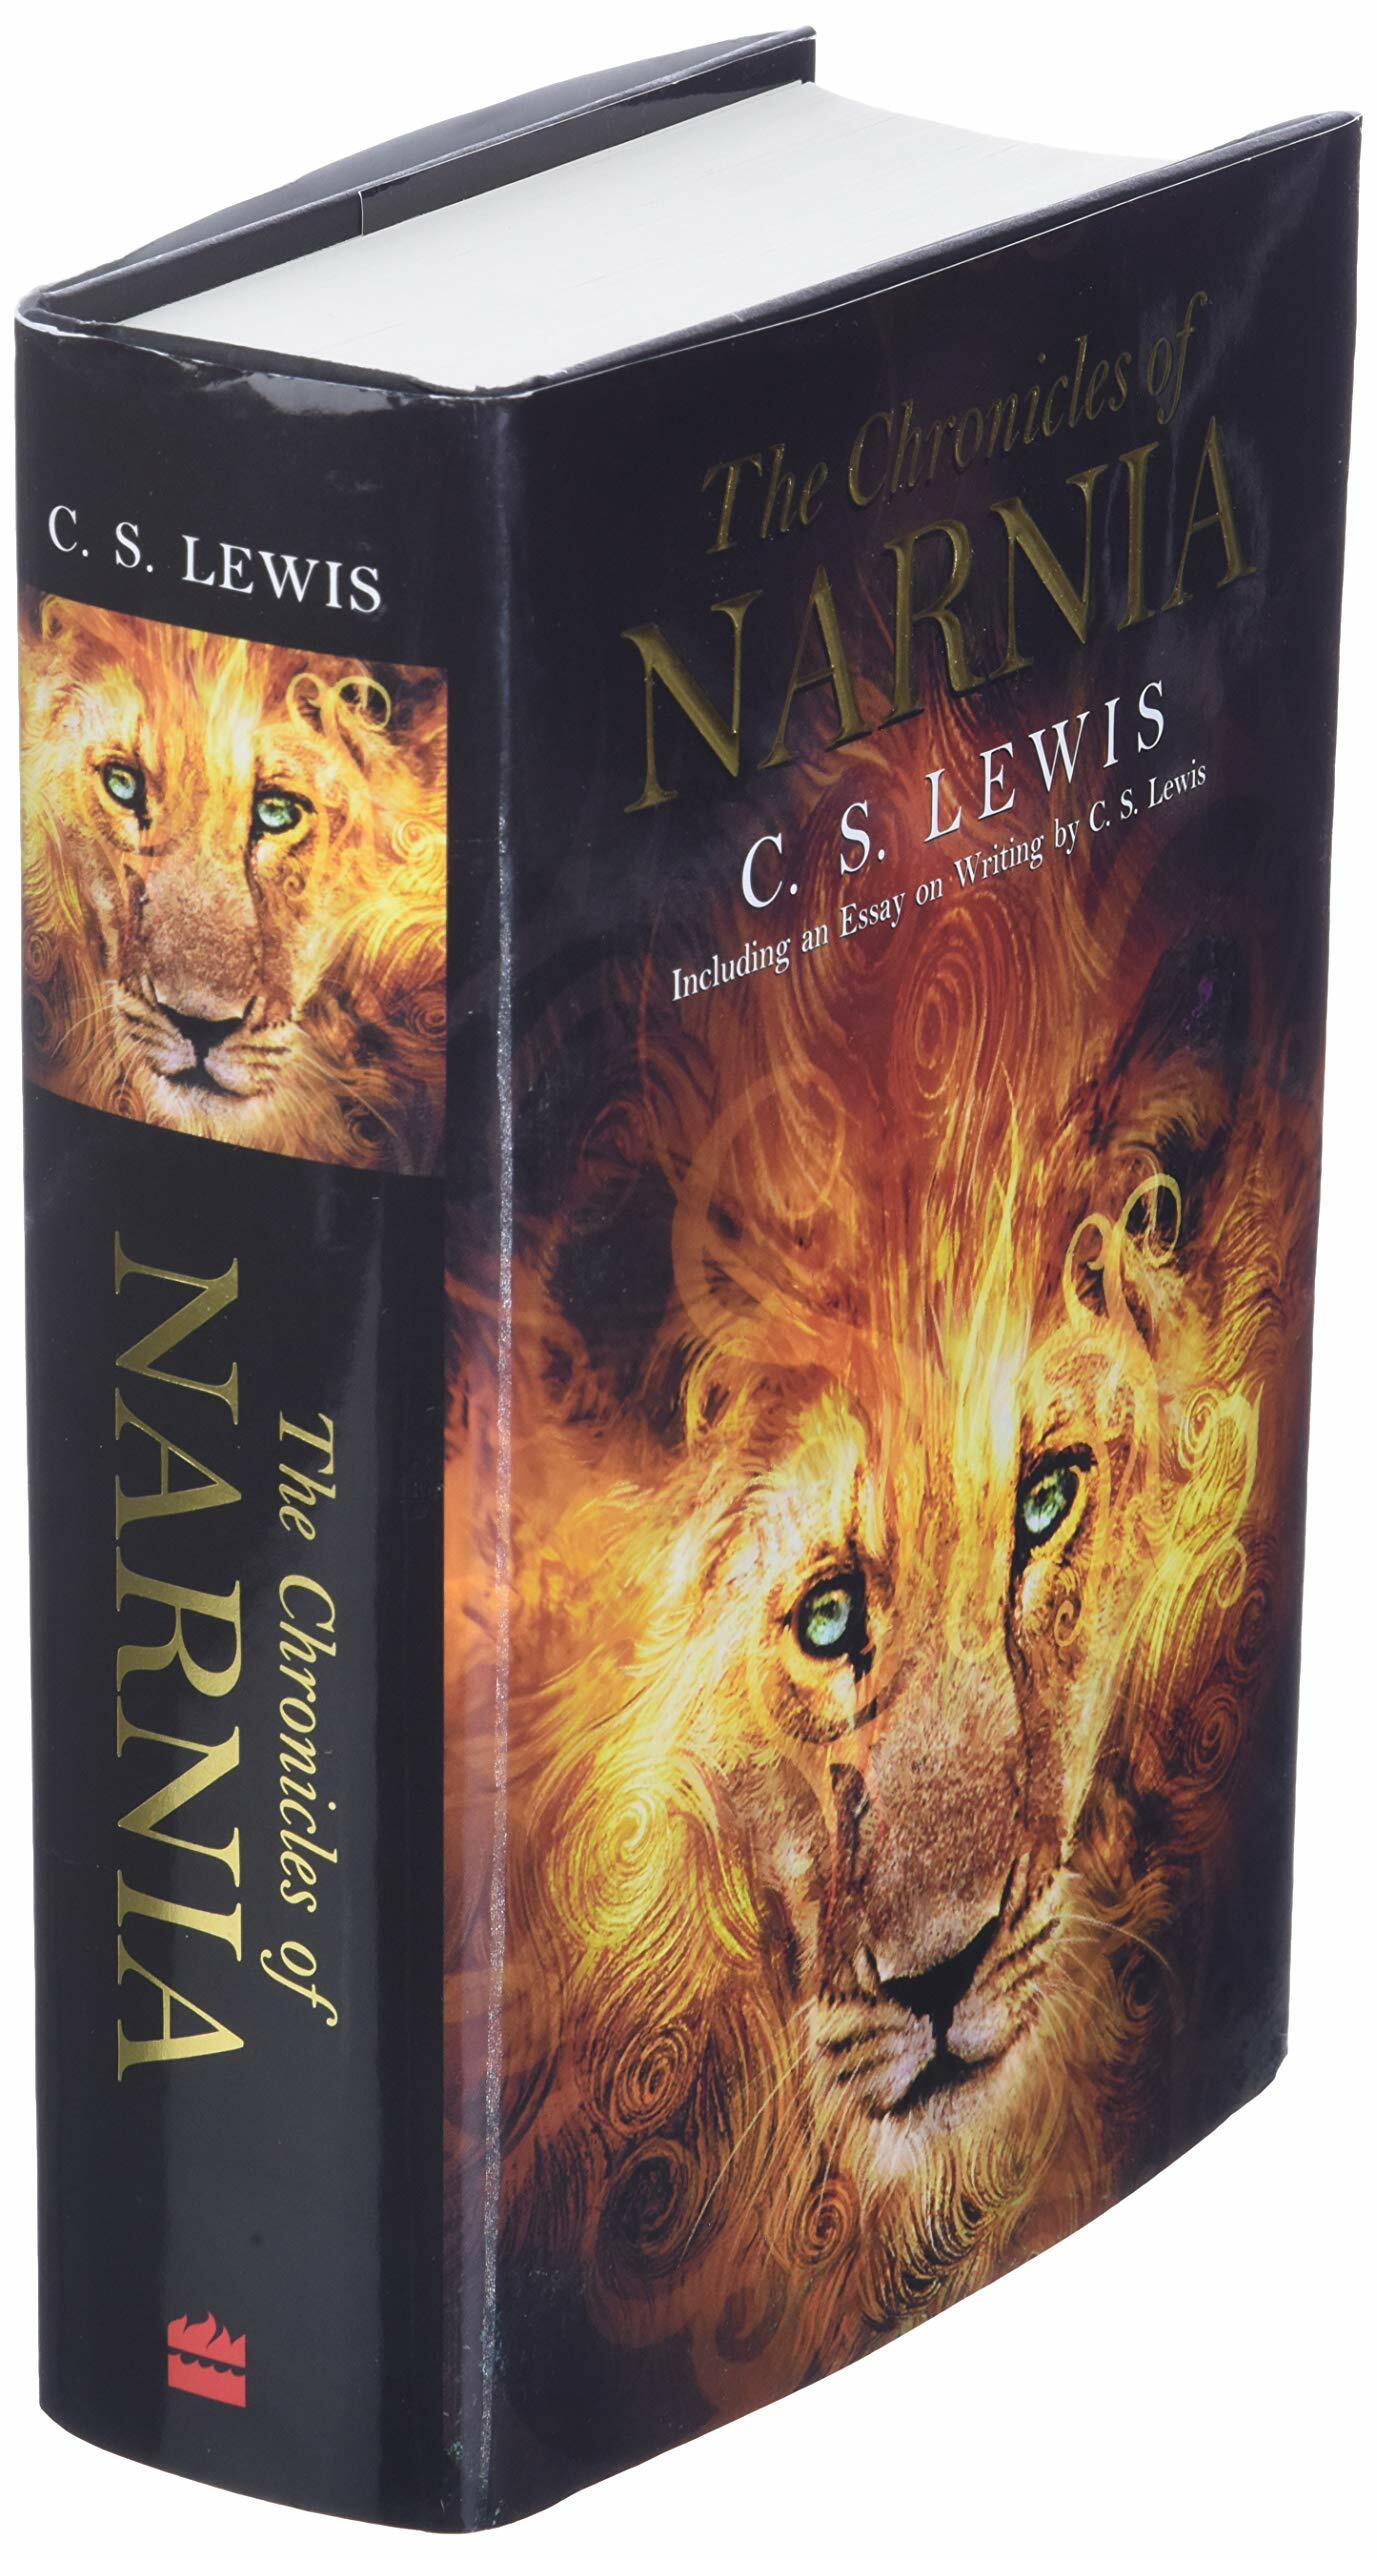 The Chronicles of Narnia: The Classic Fantasy Adventure Series (Official Edition) (Hardcover)